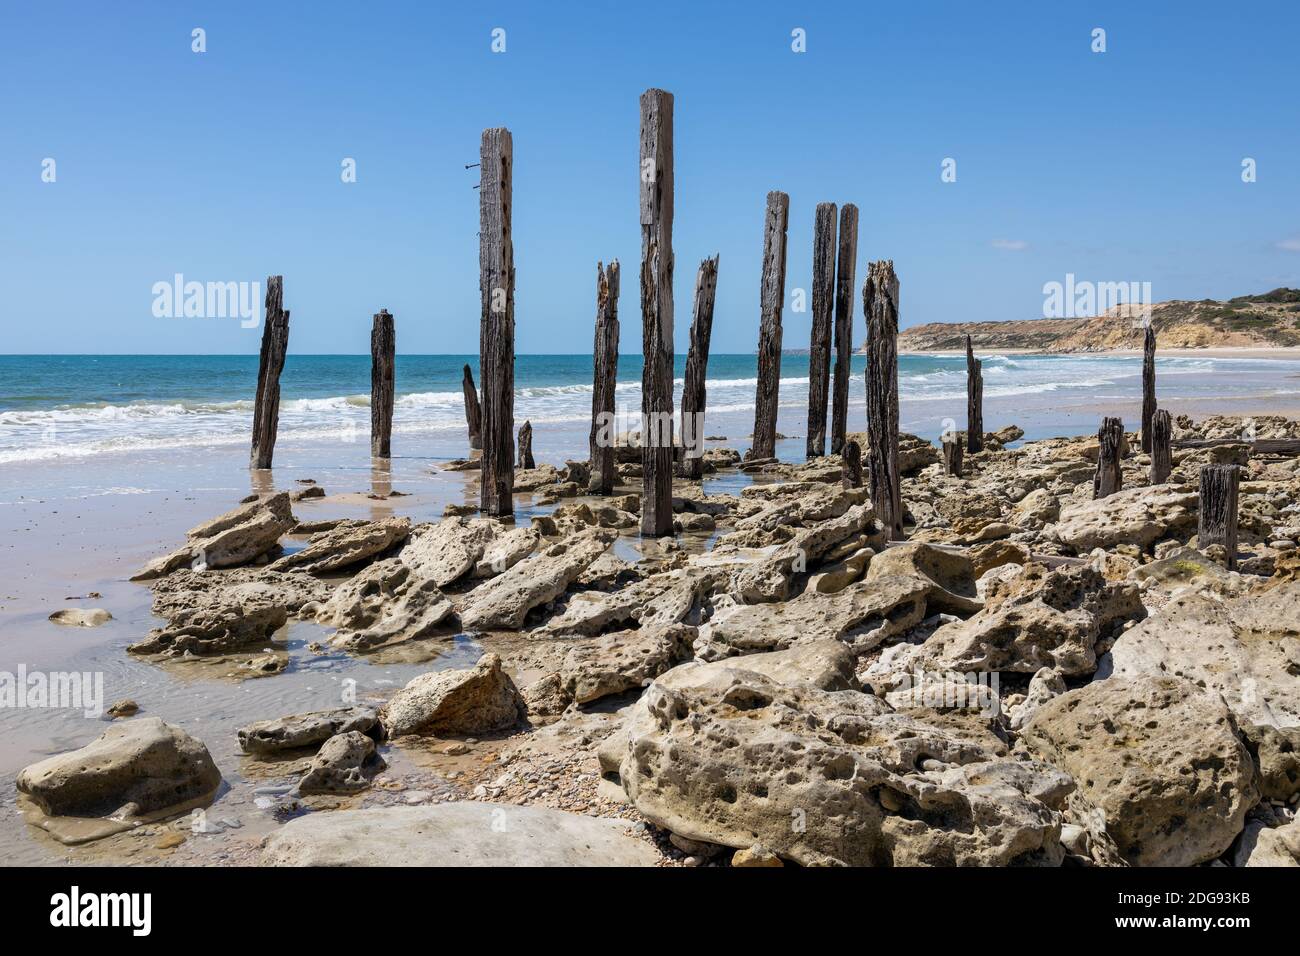 The iconic jetty ruins in Port Willunga South Australia on December 8th 2020 Stock Photo